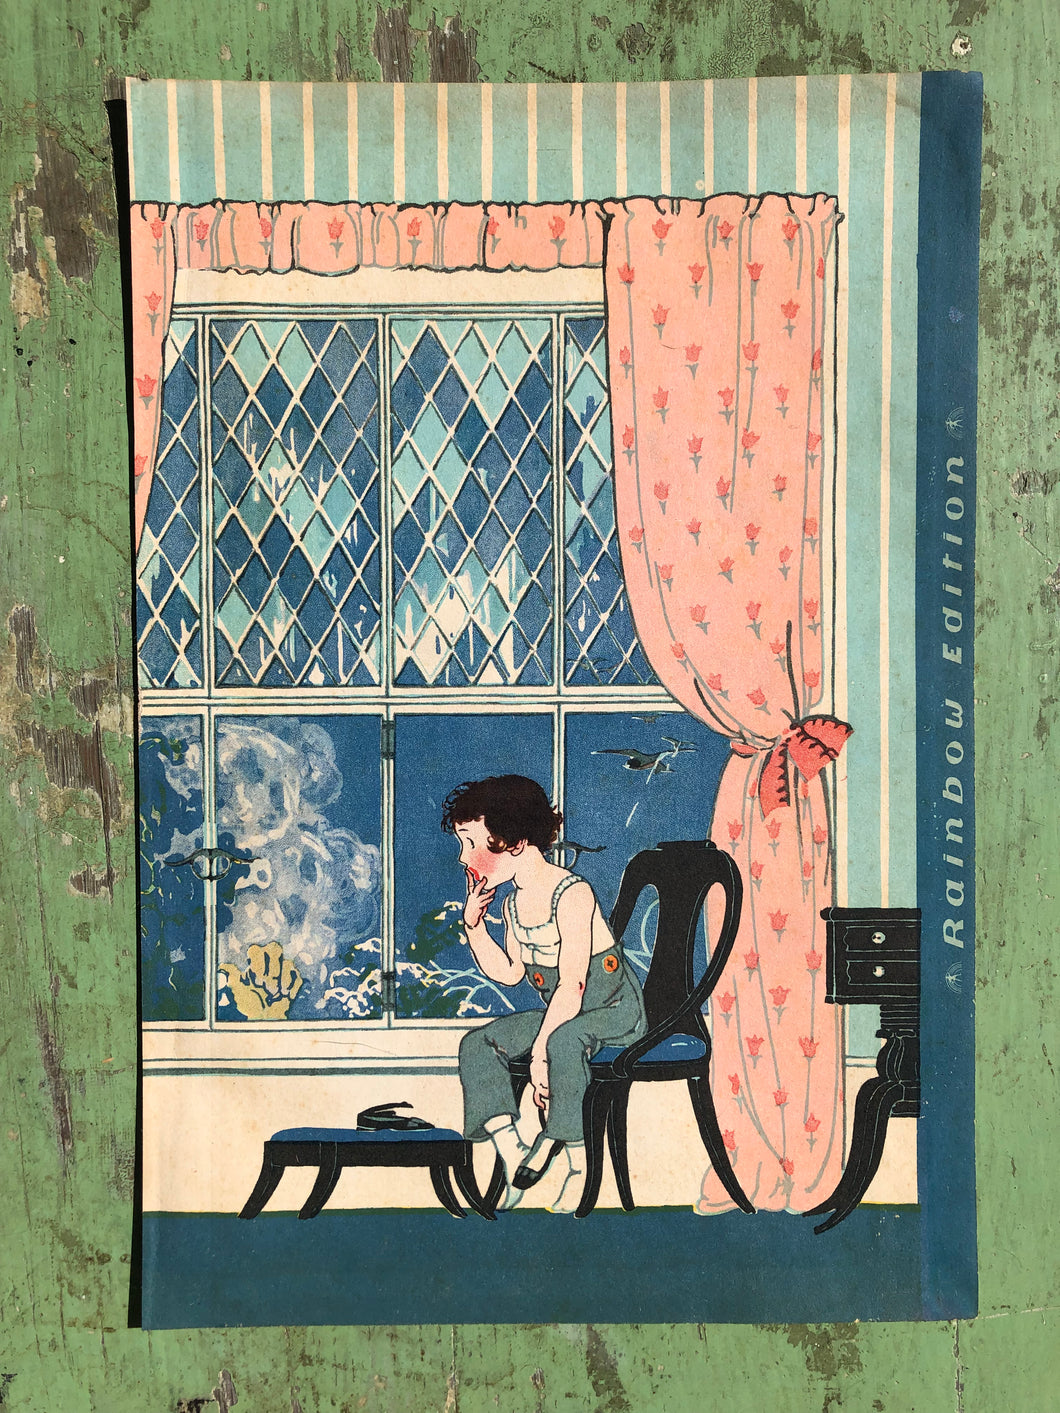 End Paper Print illustrated by Katharine Sturges Dodge from 